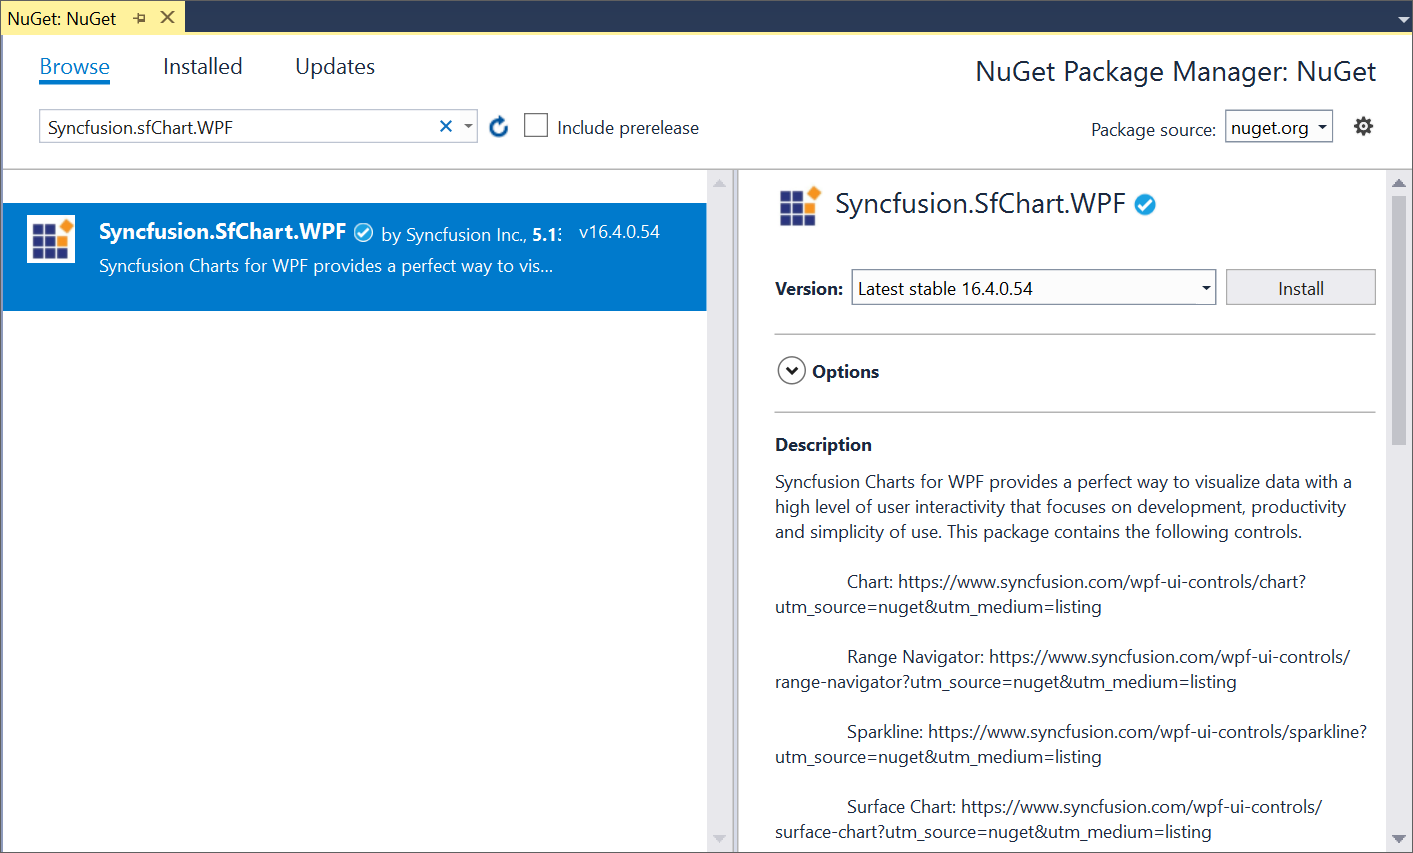 Selecting one of the syncfusion universal nuget package